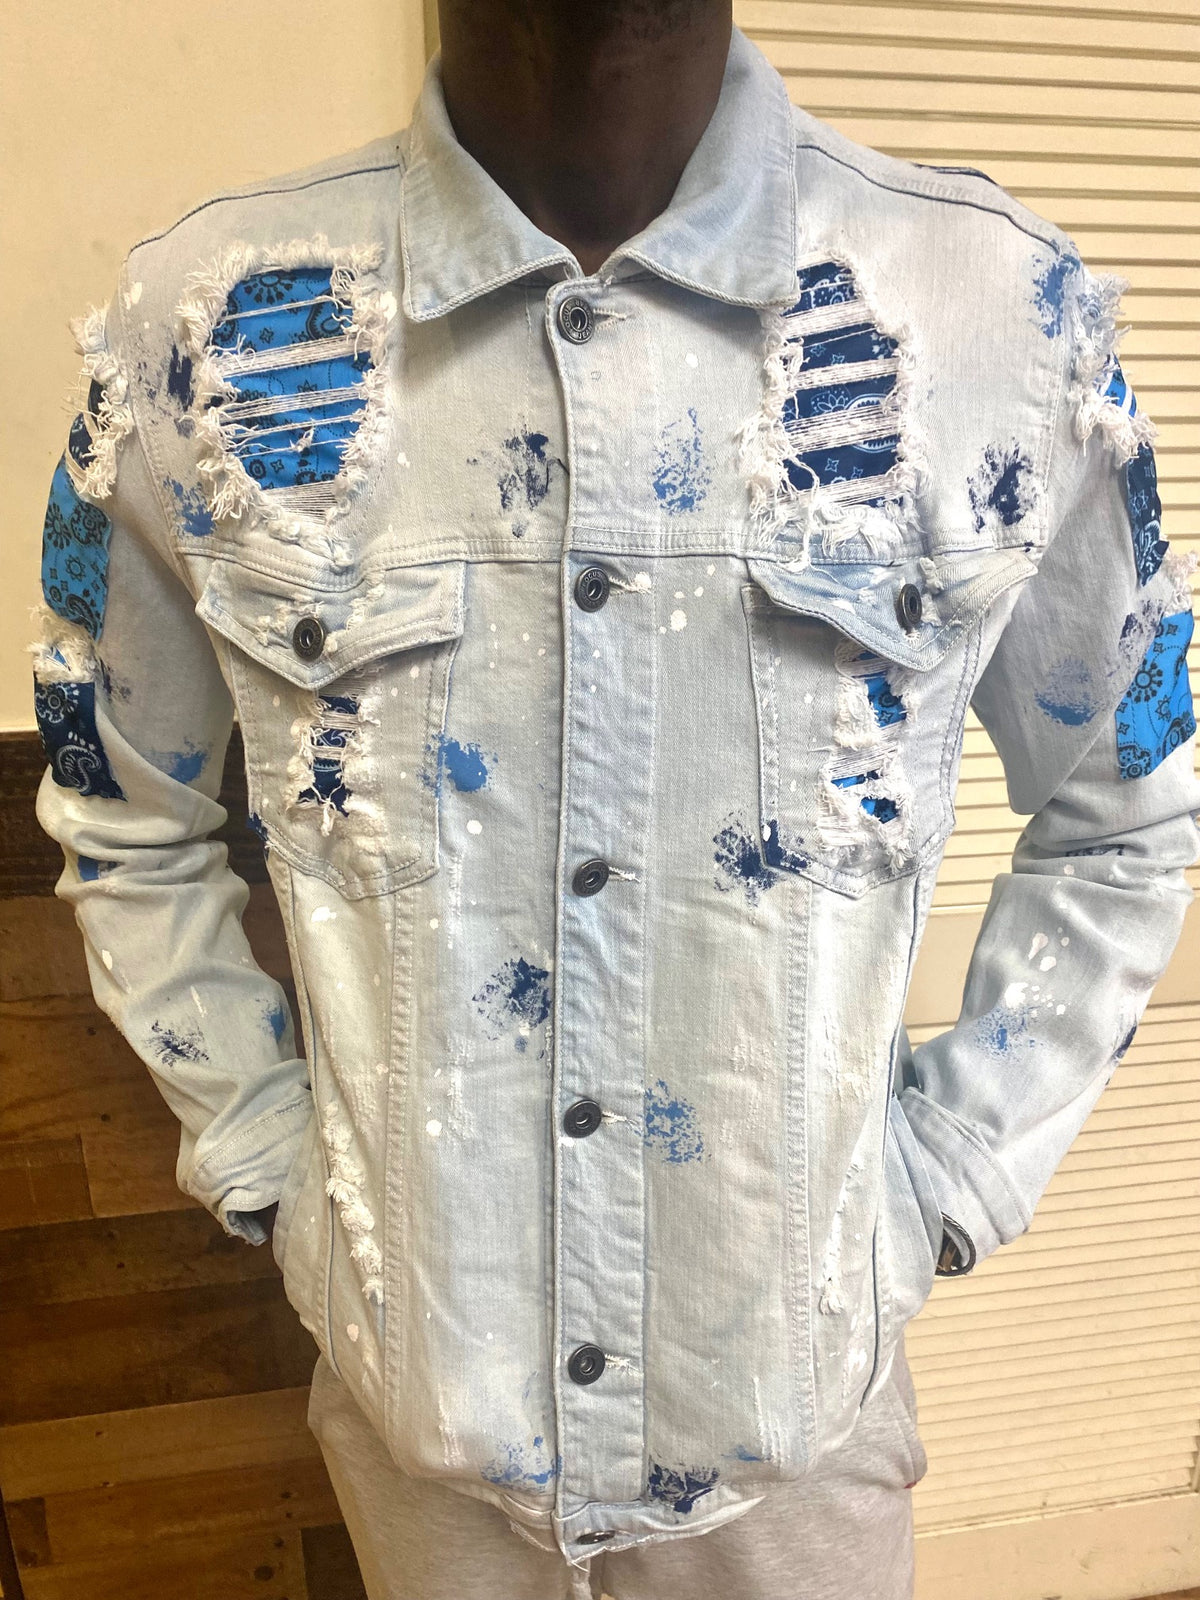 Focus - Spotted Ripped Denim Jacket - White/Blue – Todays Man Store